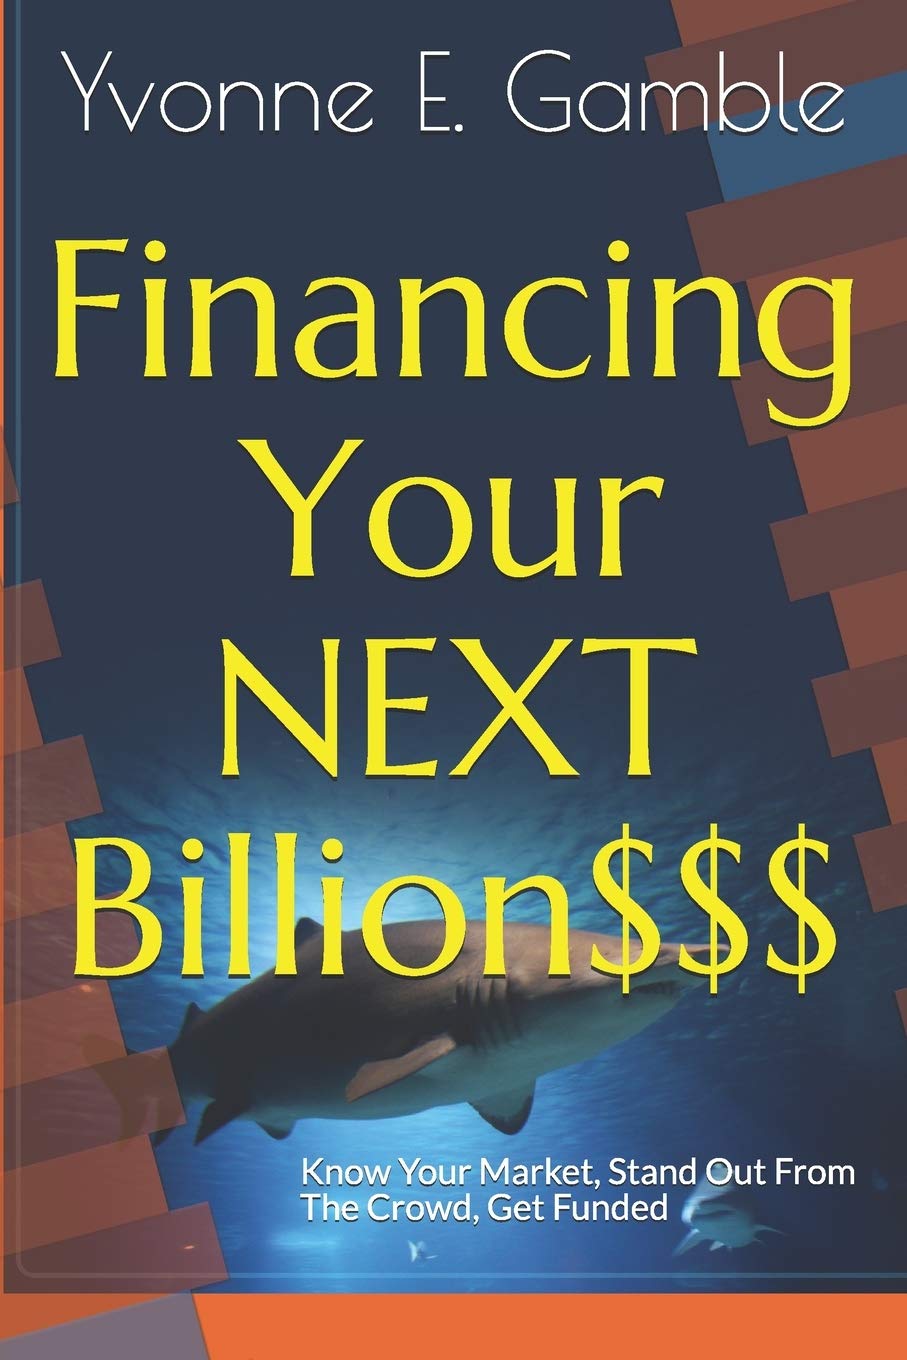 Financing Your NEXT Billion$$$: Know Your Impact, Stand Out From The Crowd and Get Funded